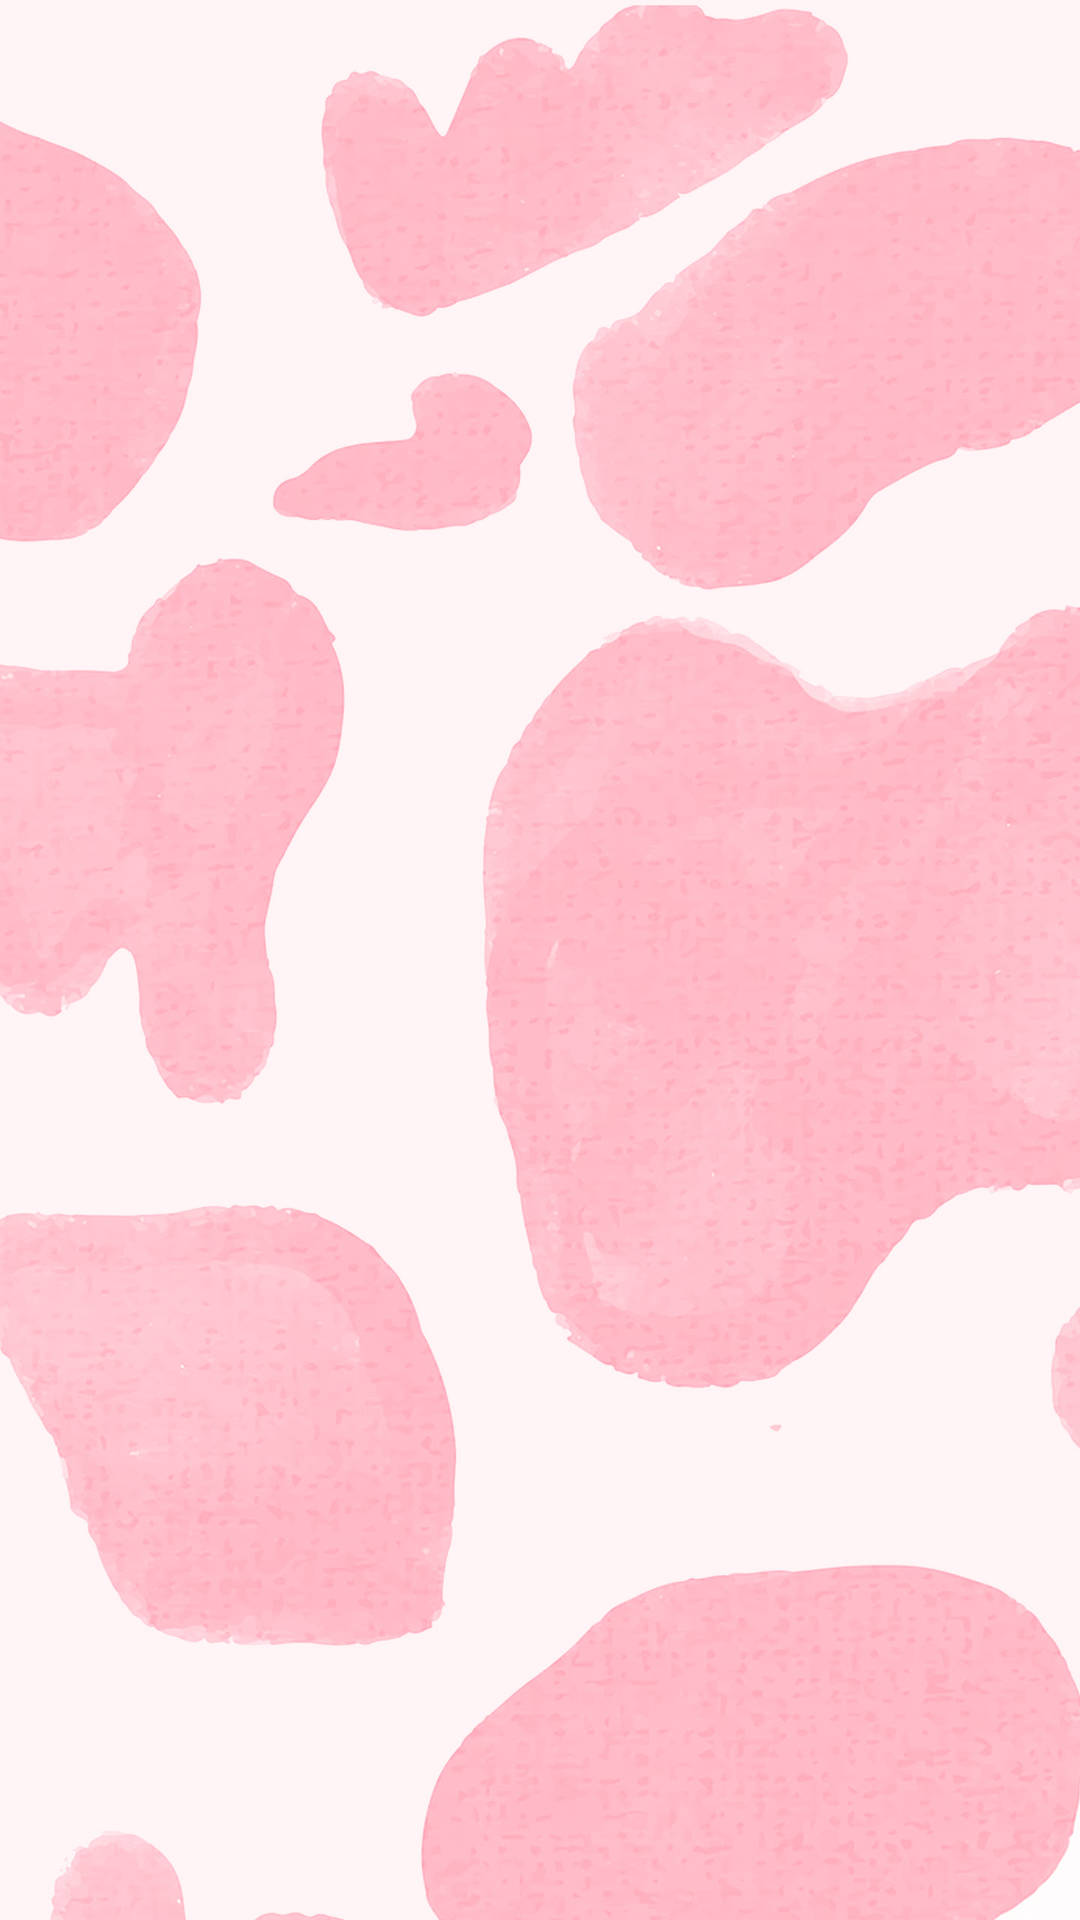 Paint-Textured Strawberry Cow Print Wallpaper